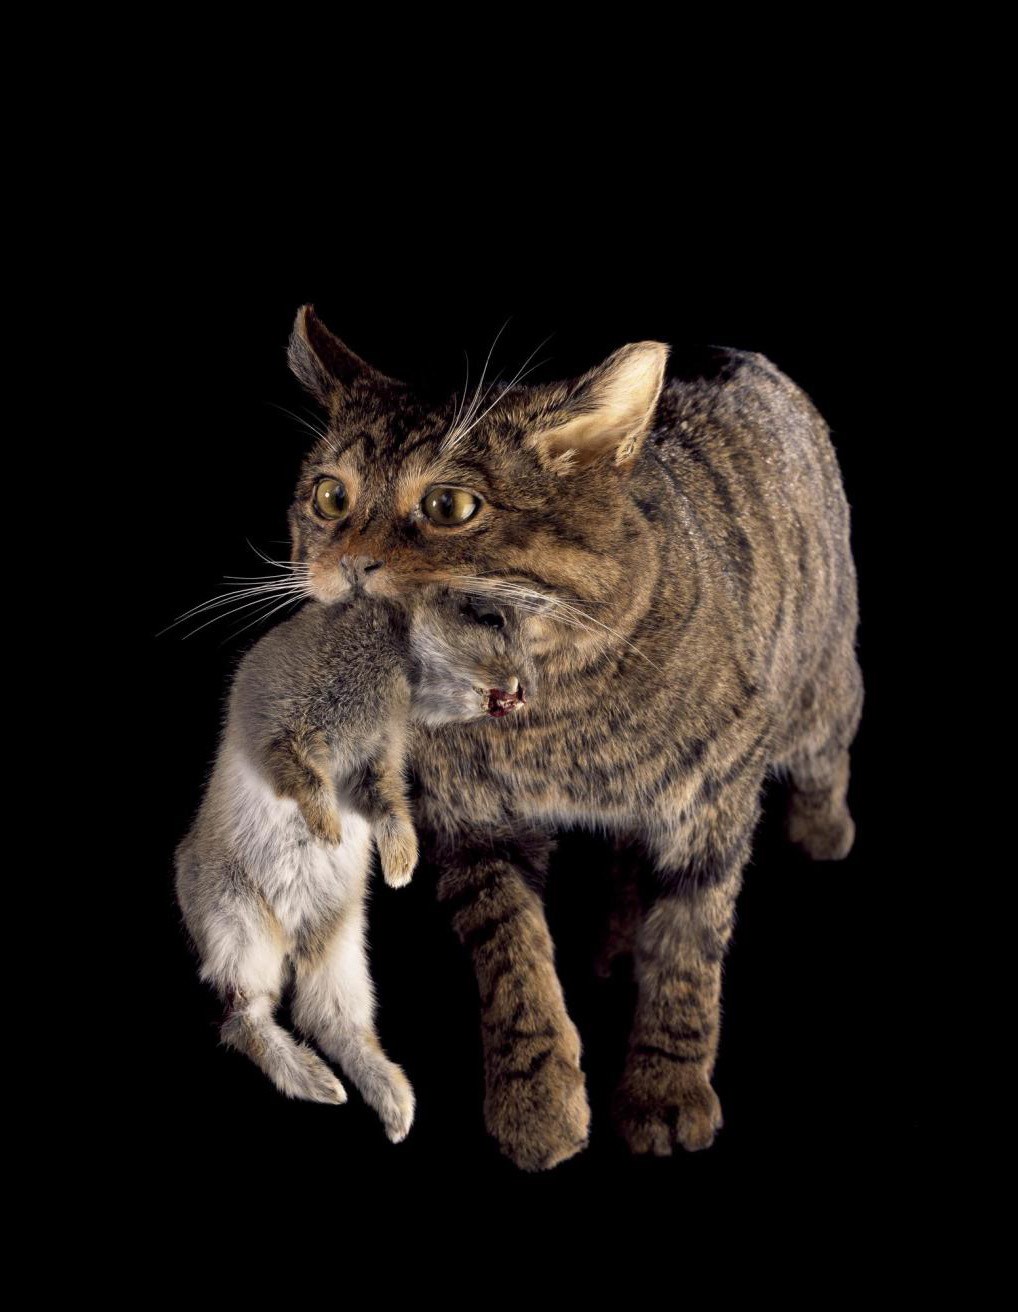 Scottish wildcat, yellow-brown with black stripes, holds a small mammal in its mouth against a black background,